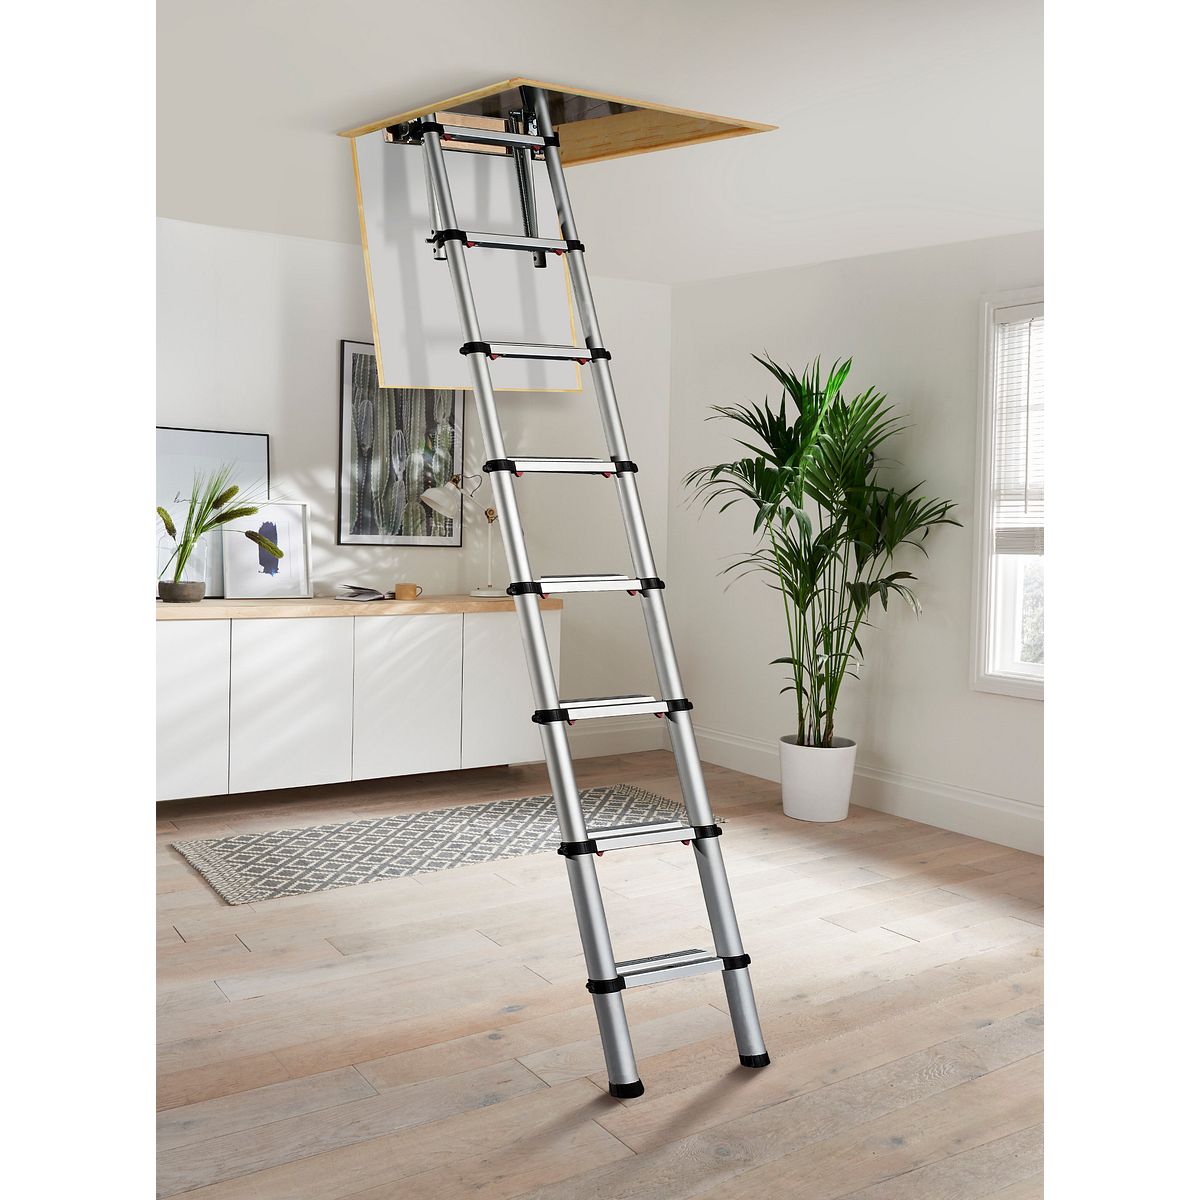 30100000 | Loft Ladders | Youngman Ladders and Access Equipment